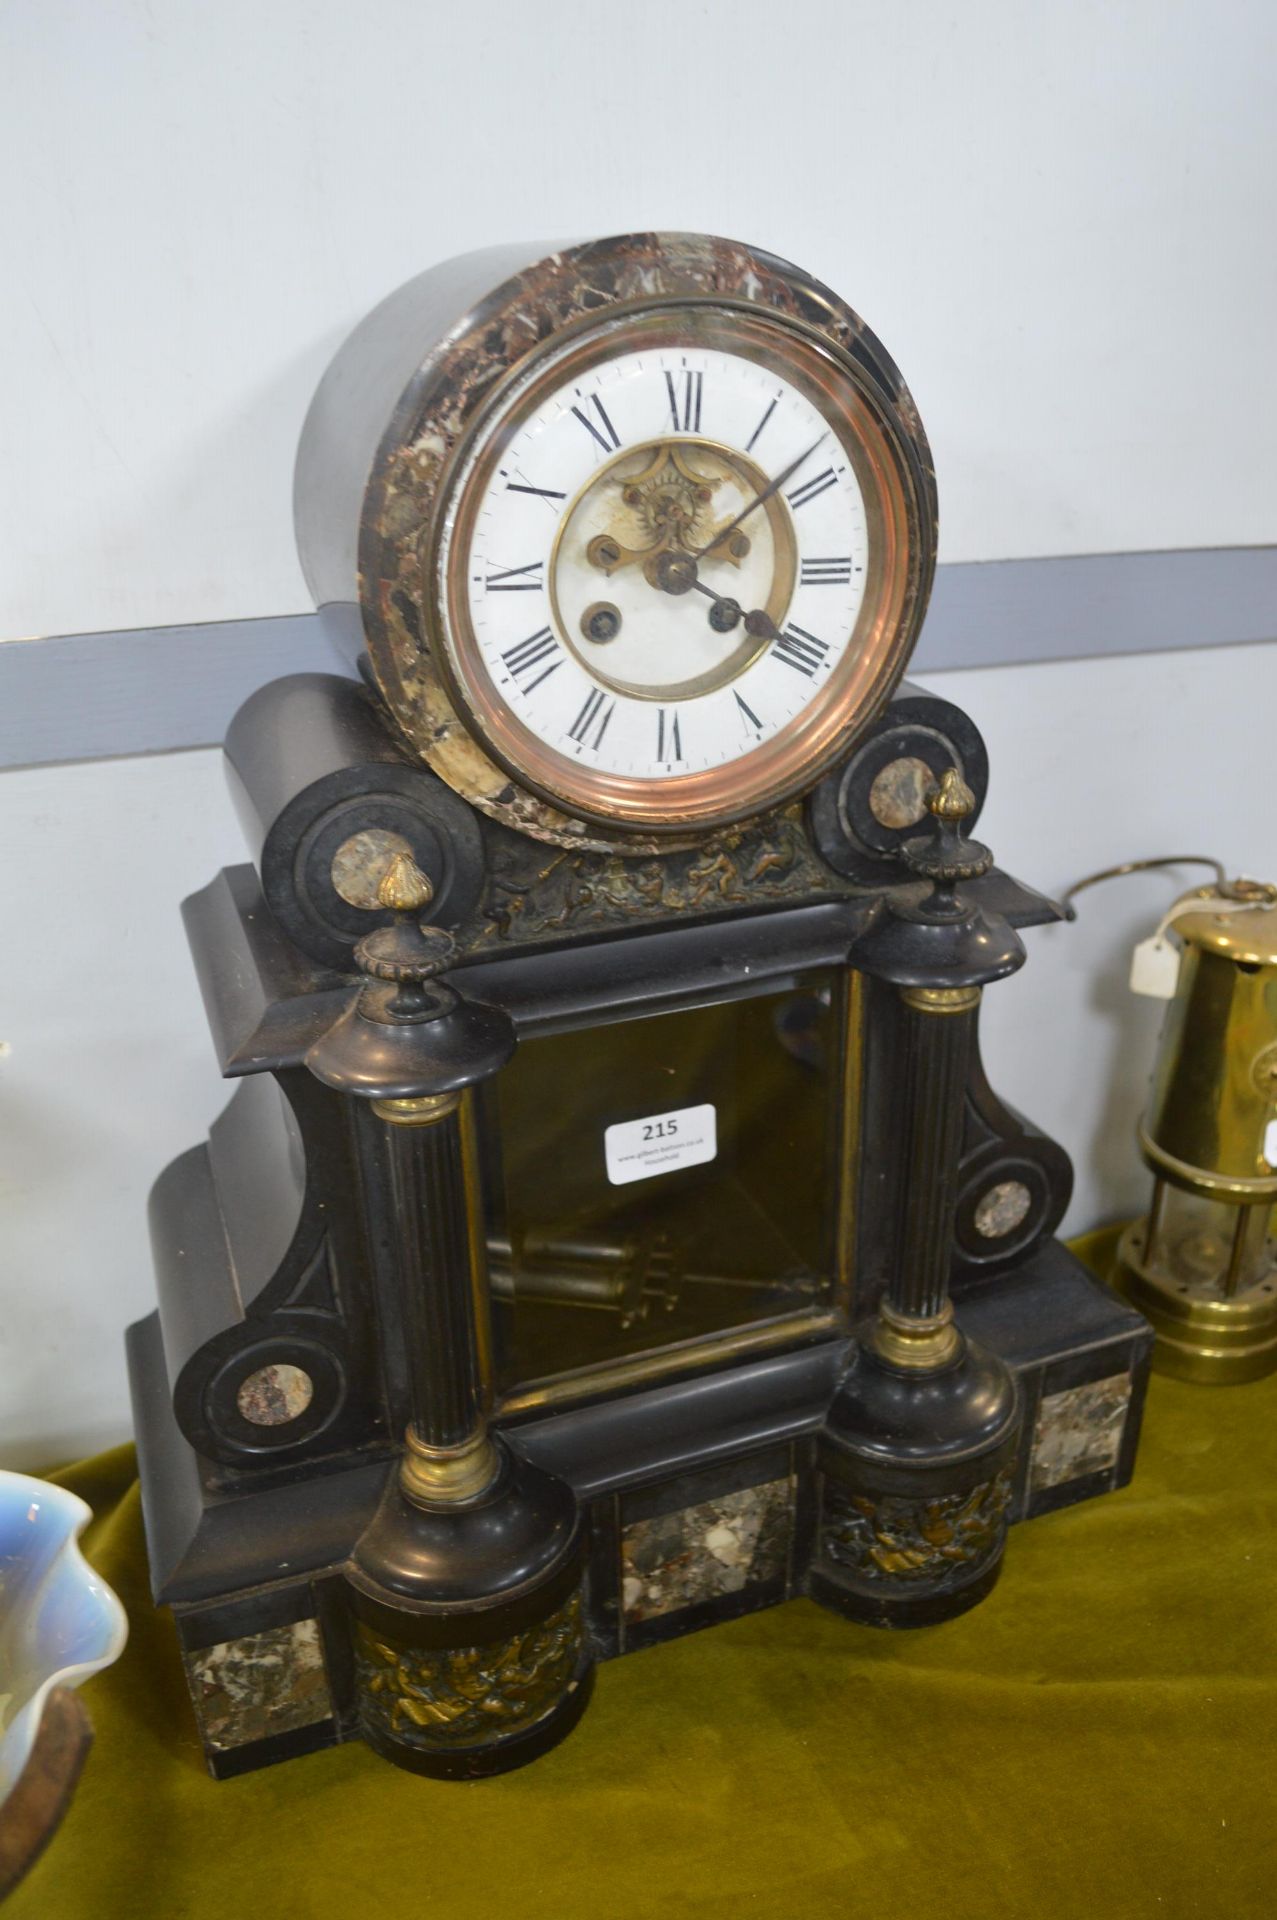 Victorian Slate and Marble Mantel Clock (working condition) - Image 2 of 2